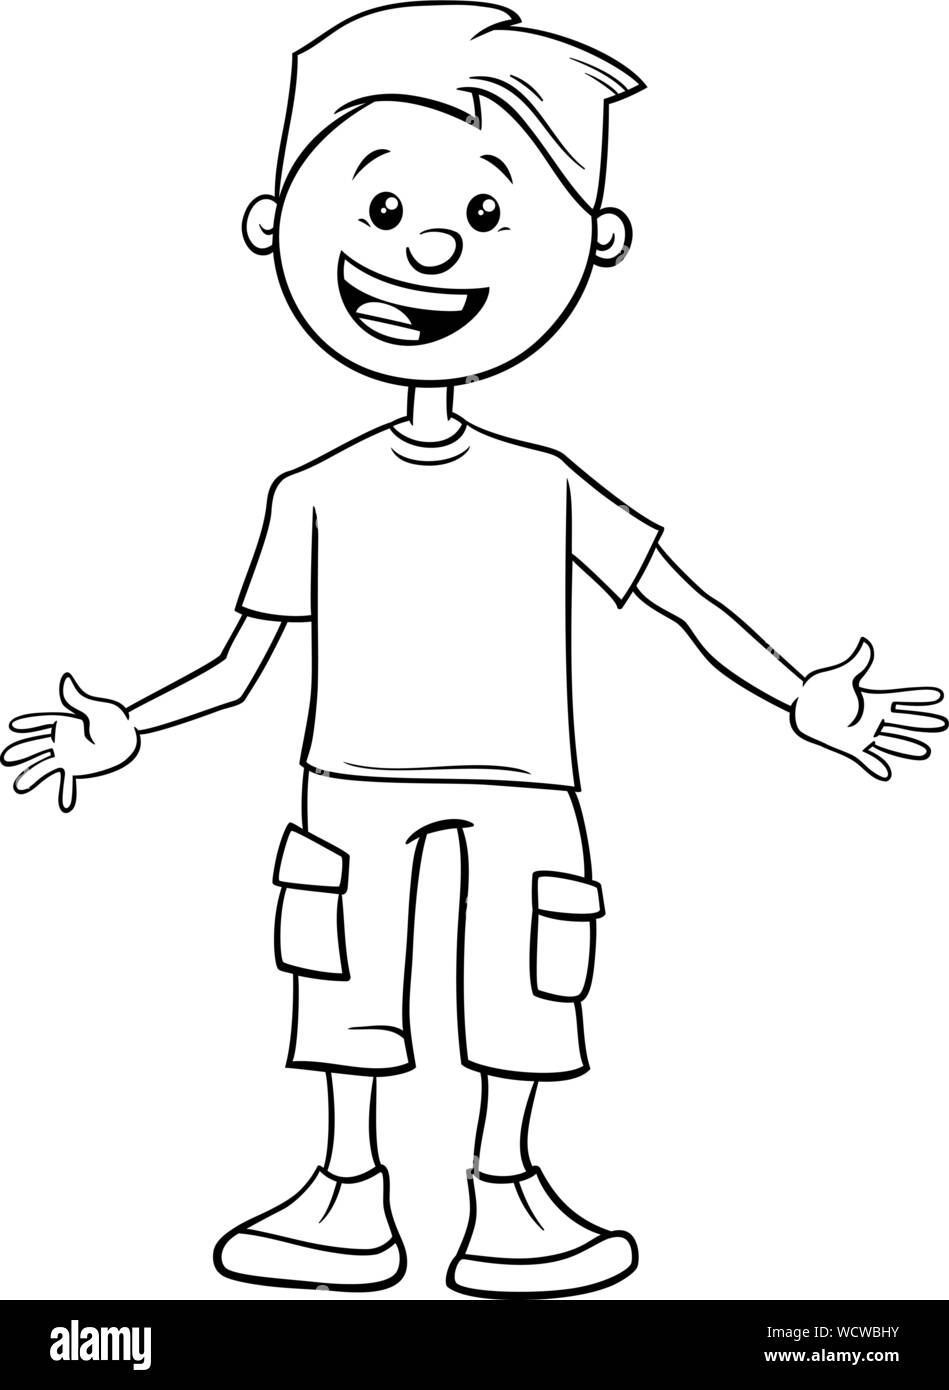 Black and White Cartoon Illustration of Elementary or Teen Age Happy Boy Character Coloring Book Stock Vector